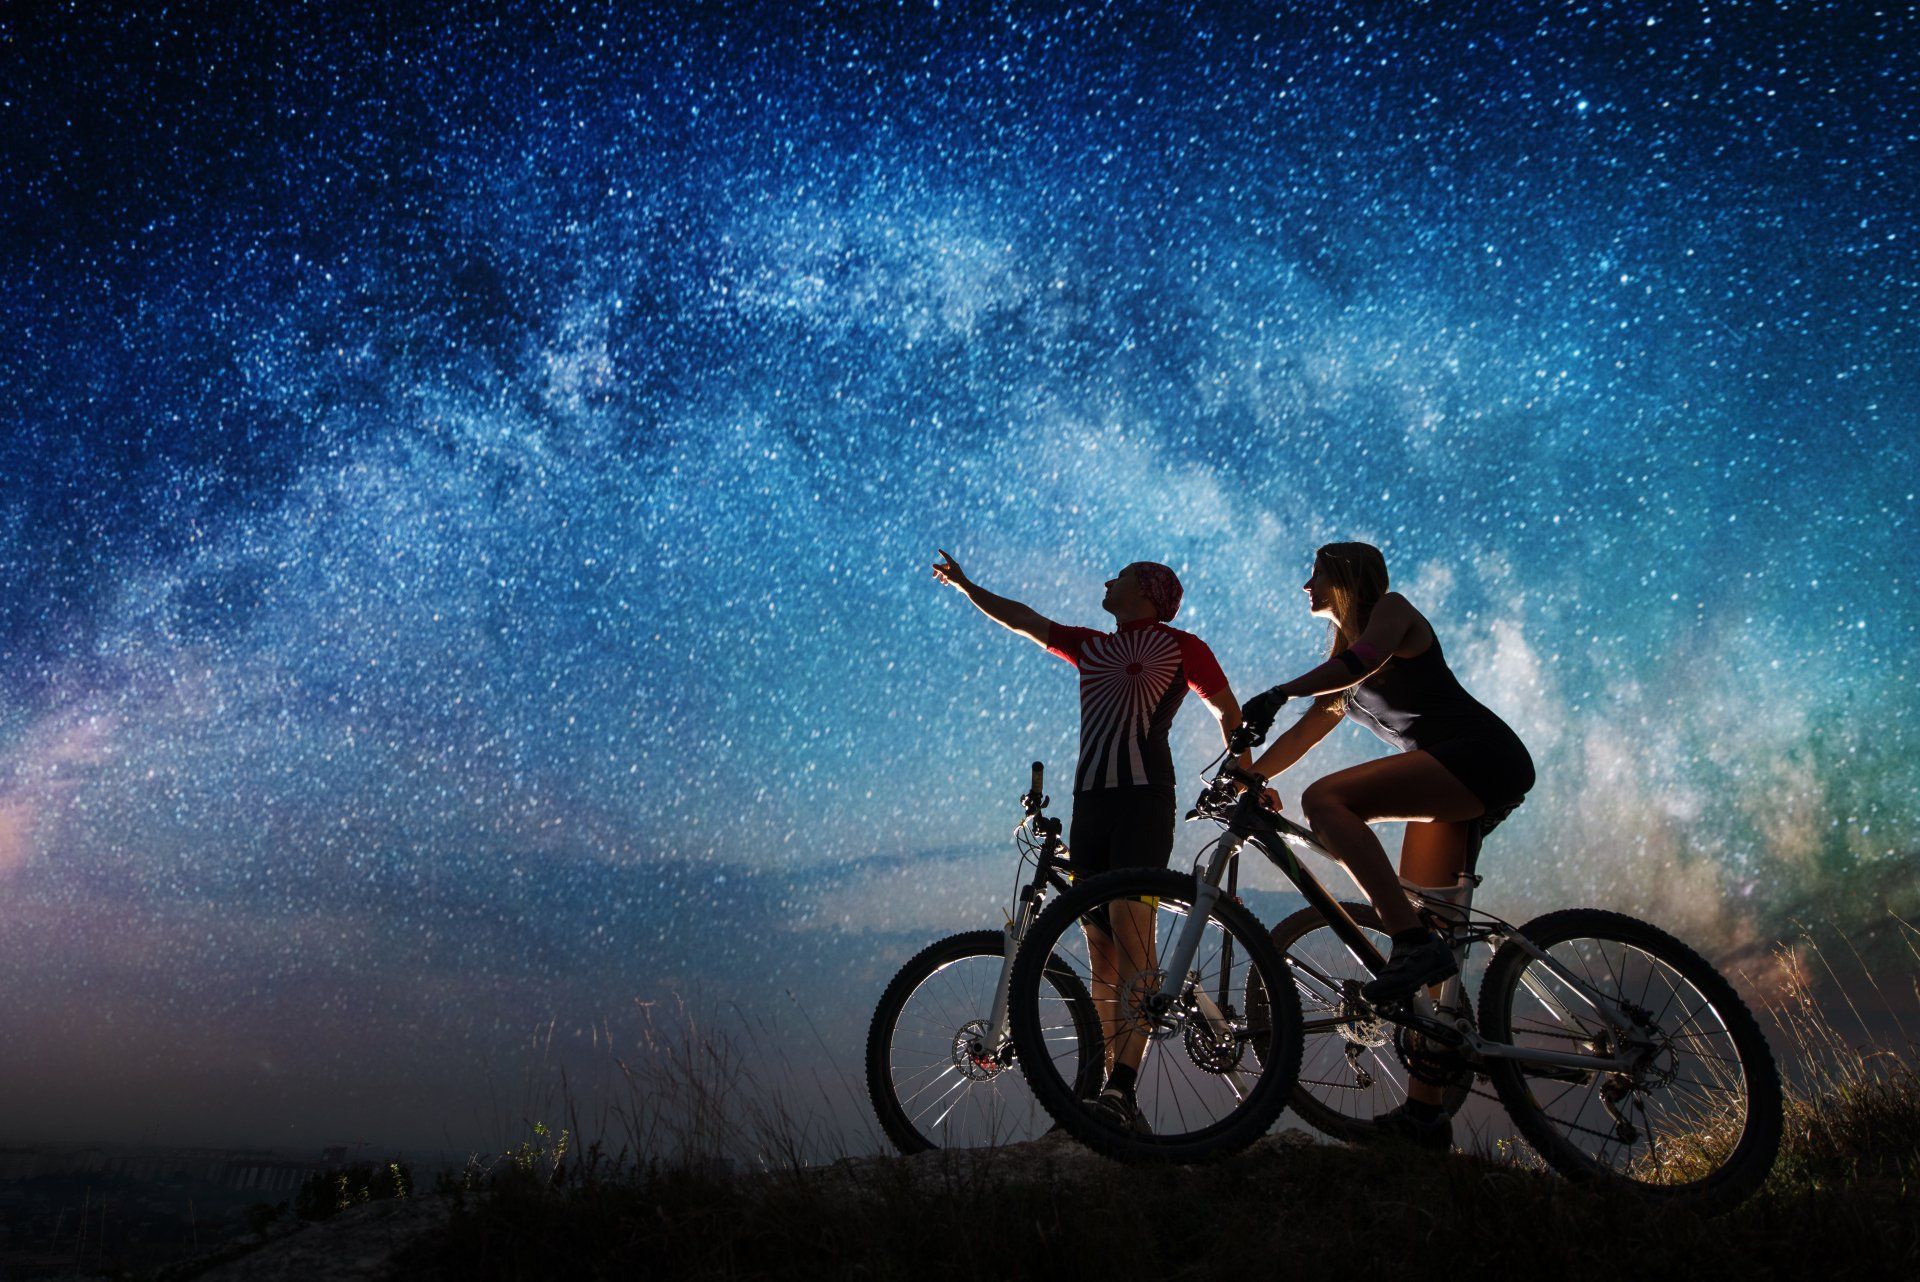 tips for being out on the trail after dark while on your mountain bike